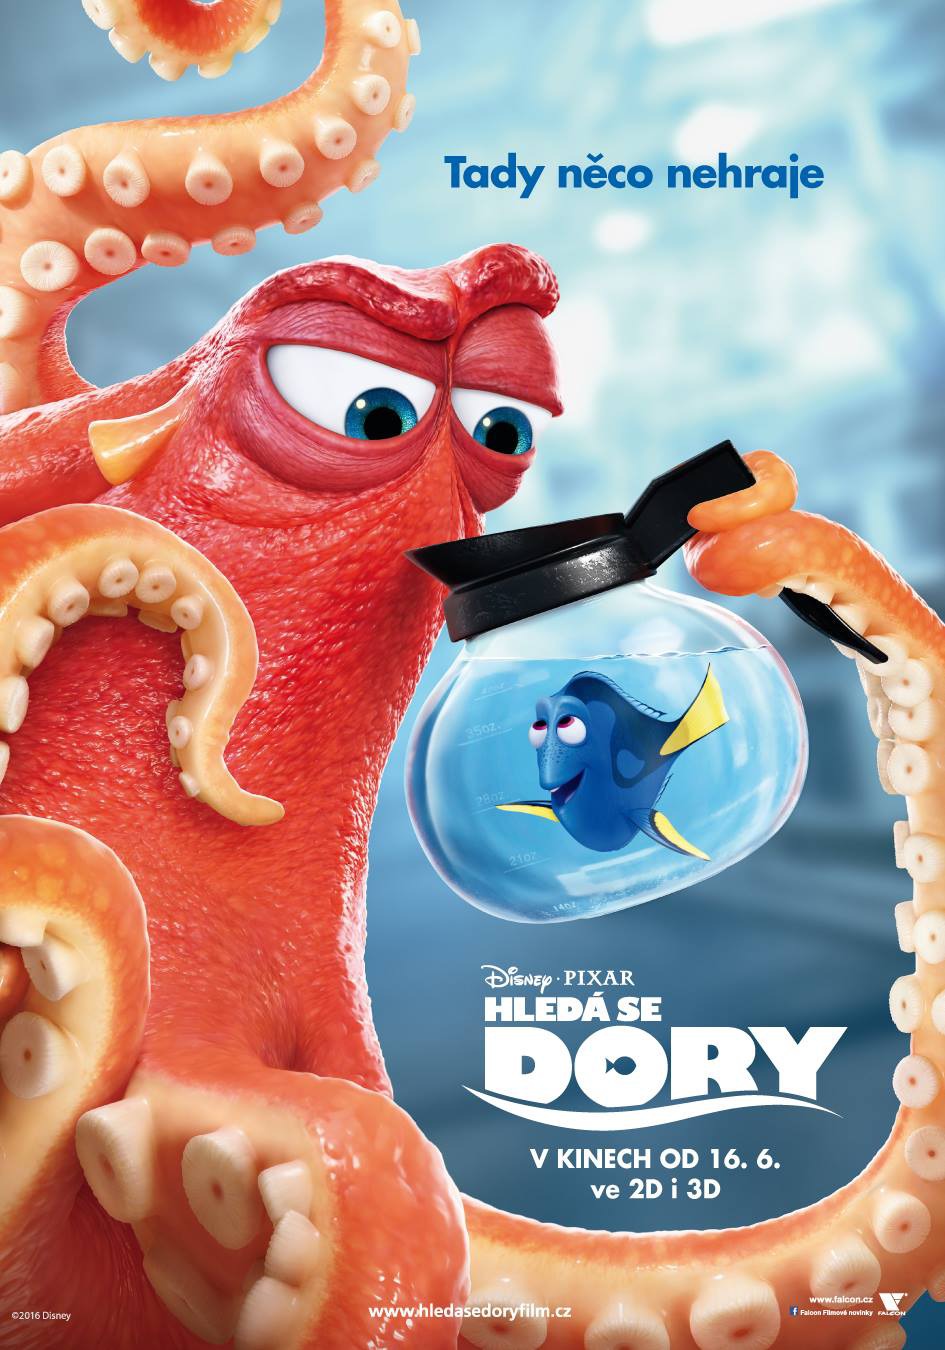 Extra Large Movie Poster Image for Finding Dory (#16 of 23)